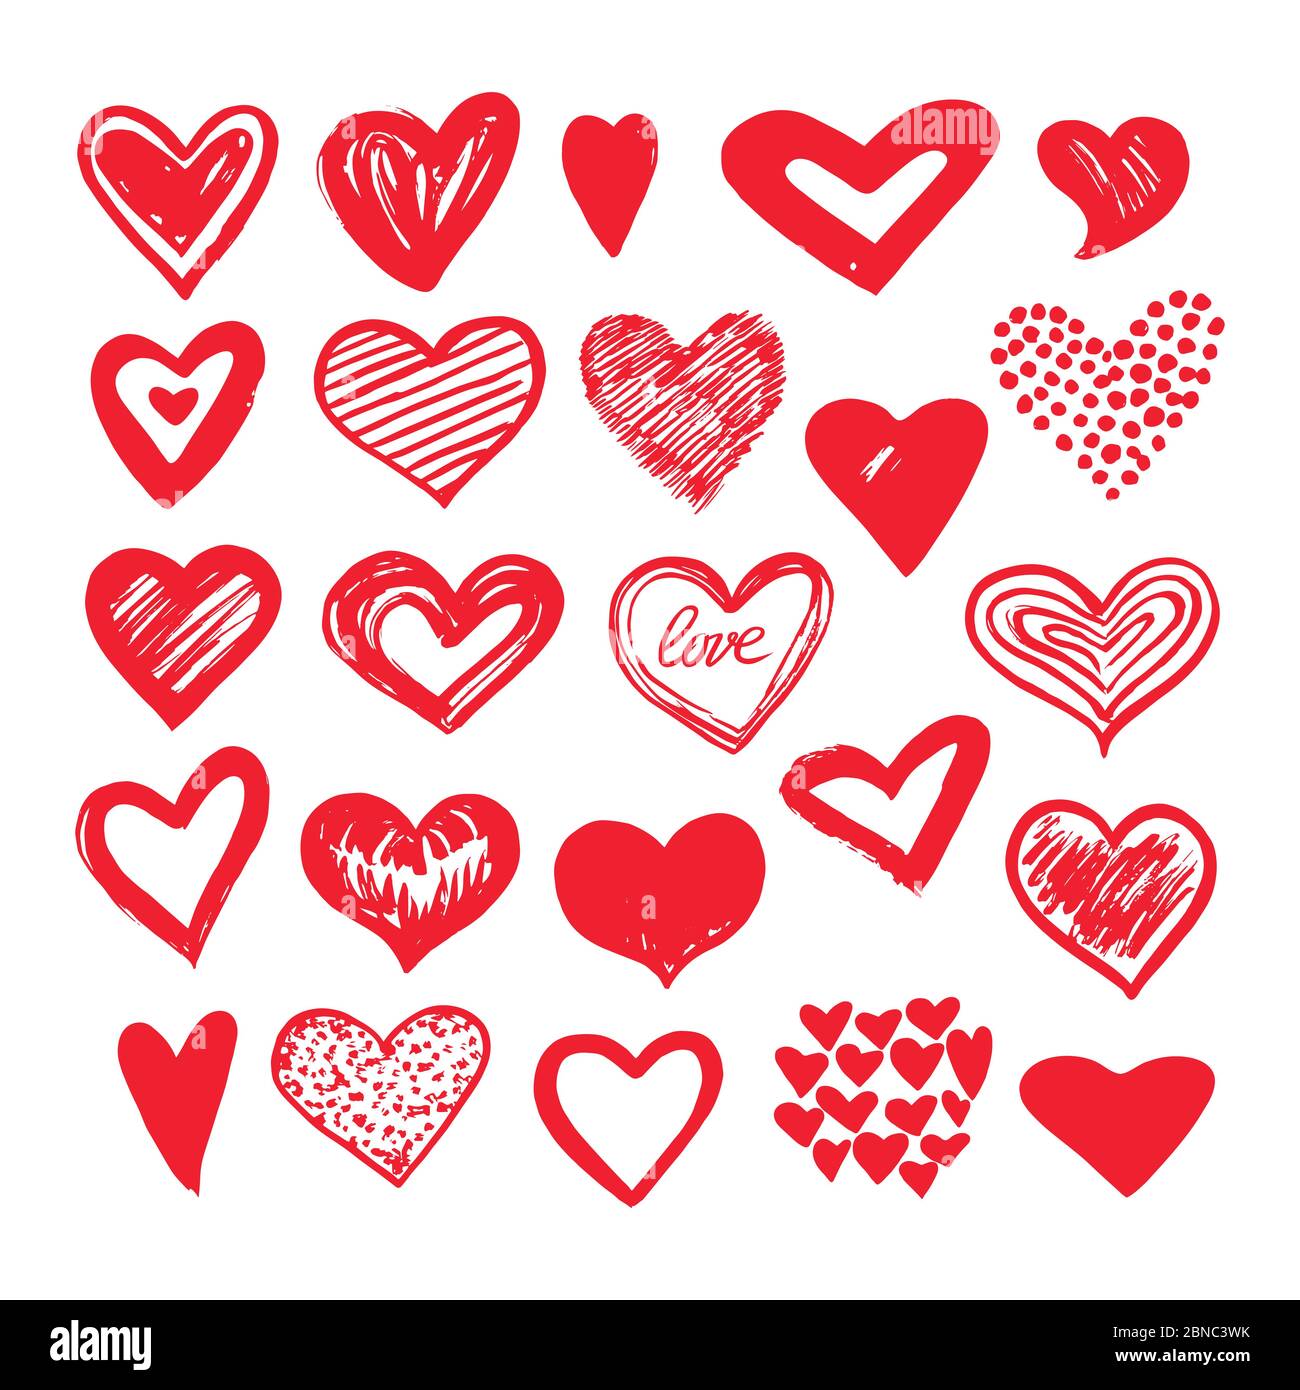 Sketch hearts. Romantic doodle love elements. Hearted shapes valentines day vector icons. Illustration of heart shape drawing Stock Vector